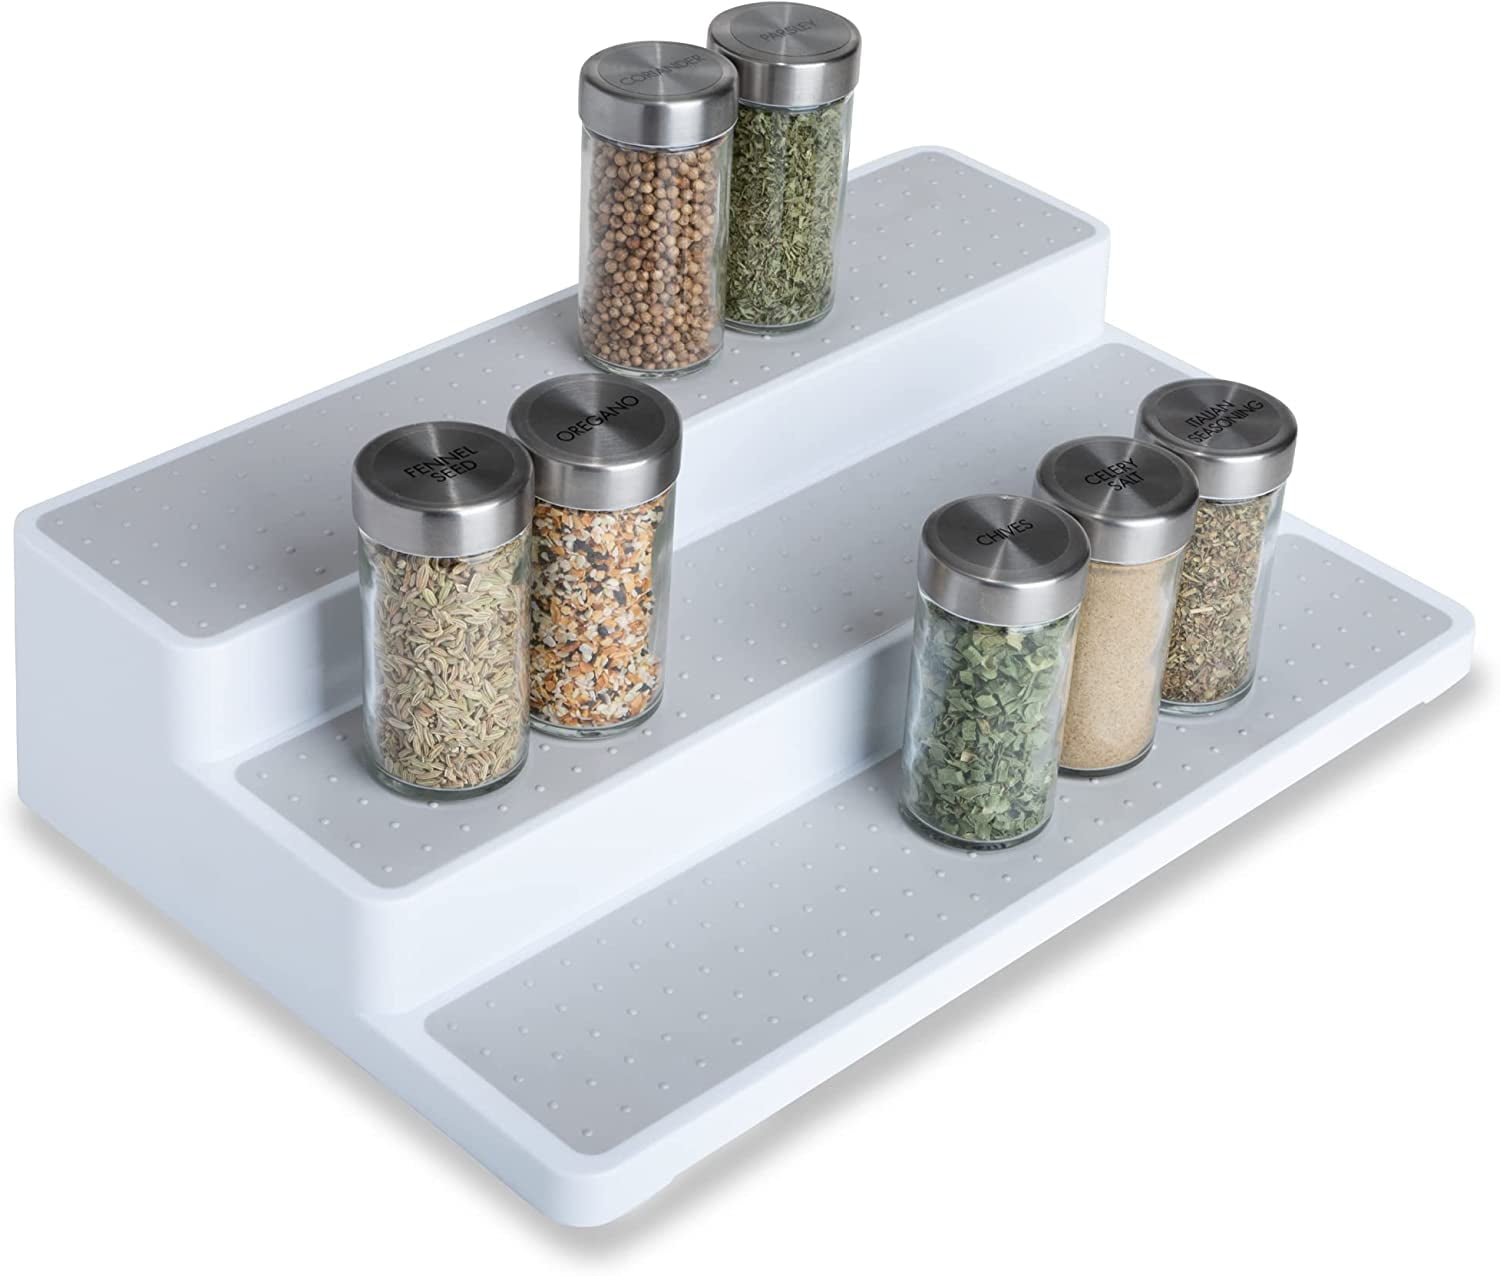 3 Tier Non-Skid Spice Rack Organizer for Cabinet Pantry Kitchen Countertop Stand 